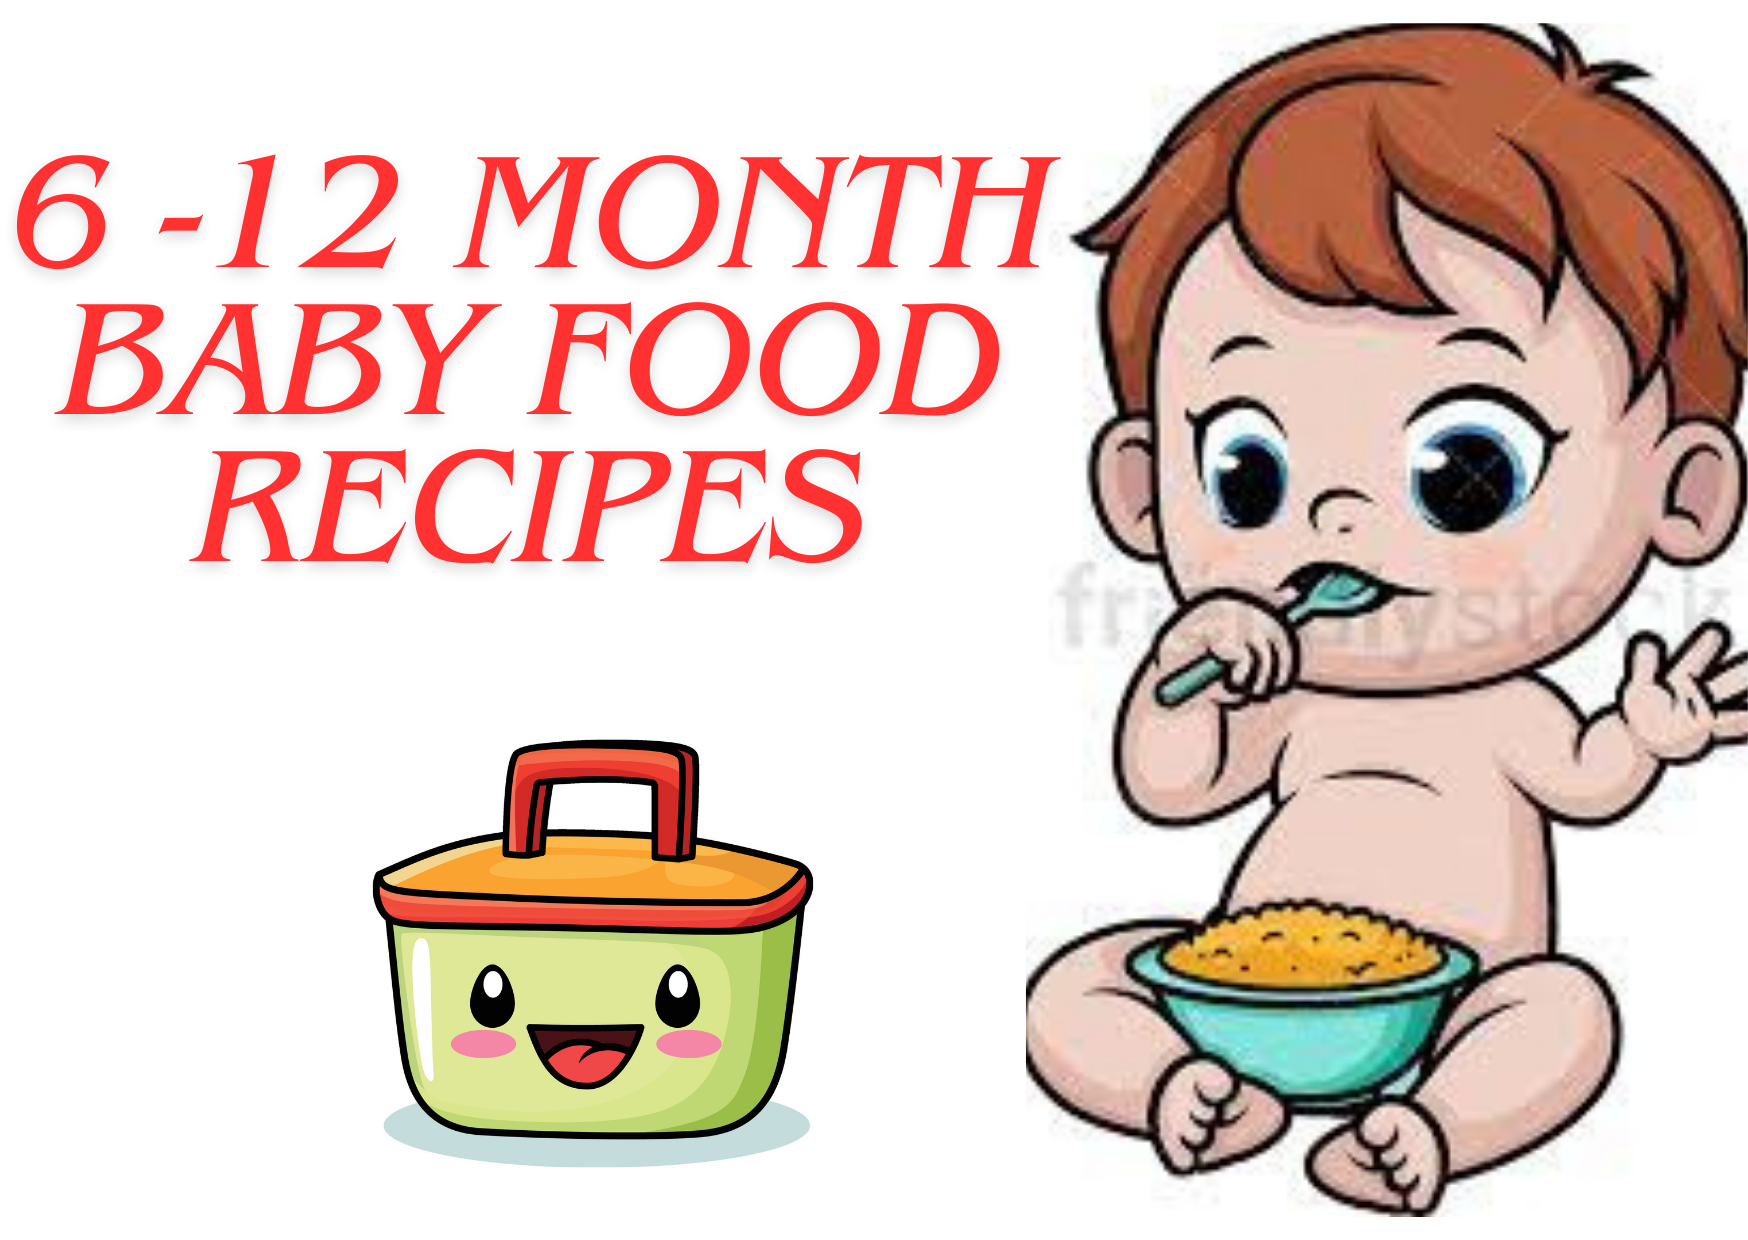 Baby food recipes in marathi for 6 -12 month baby